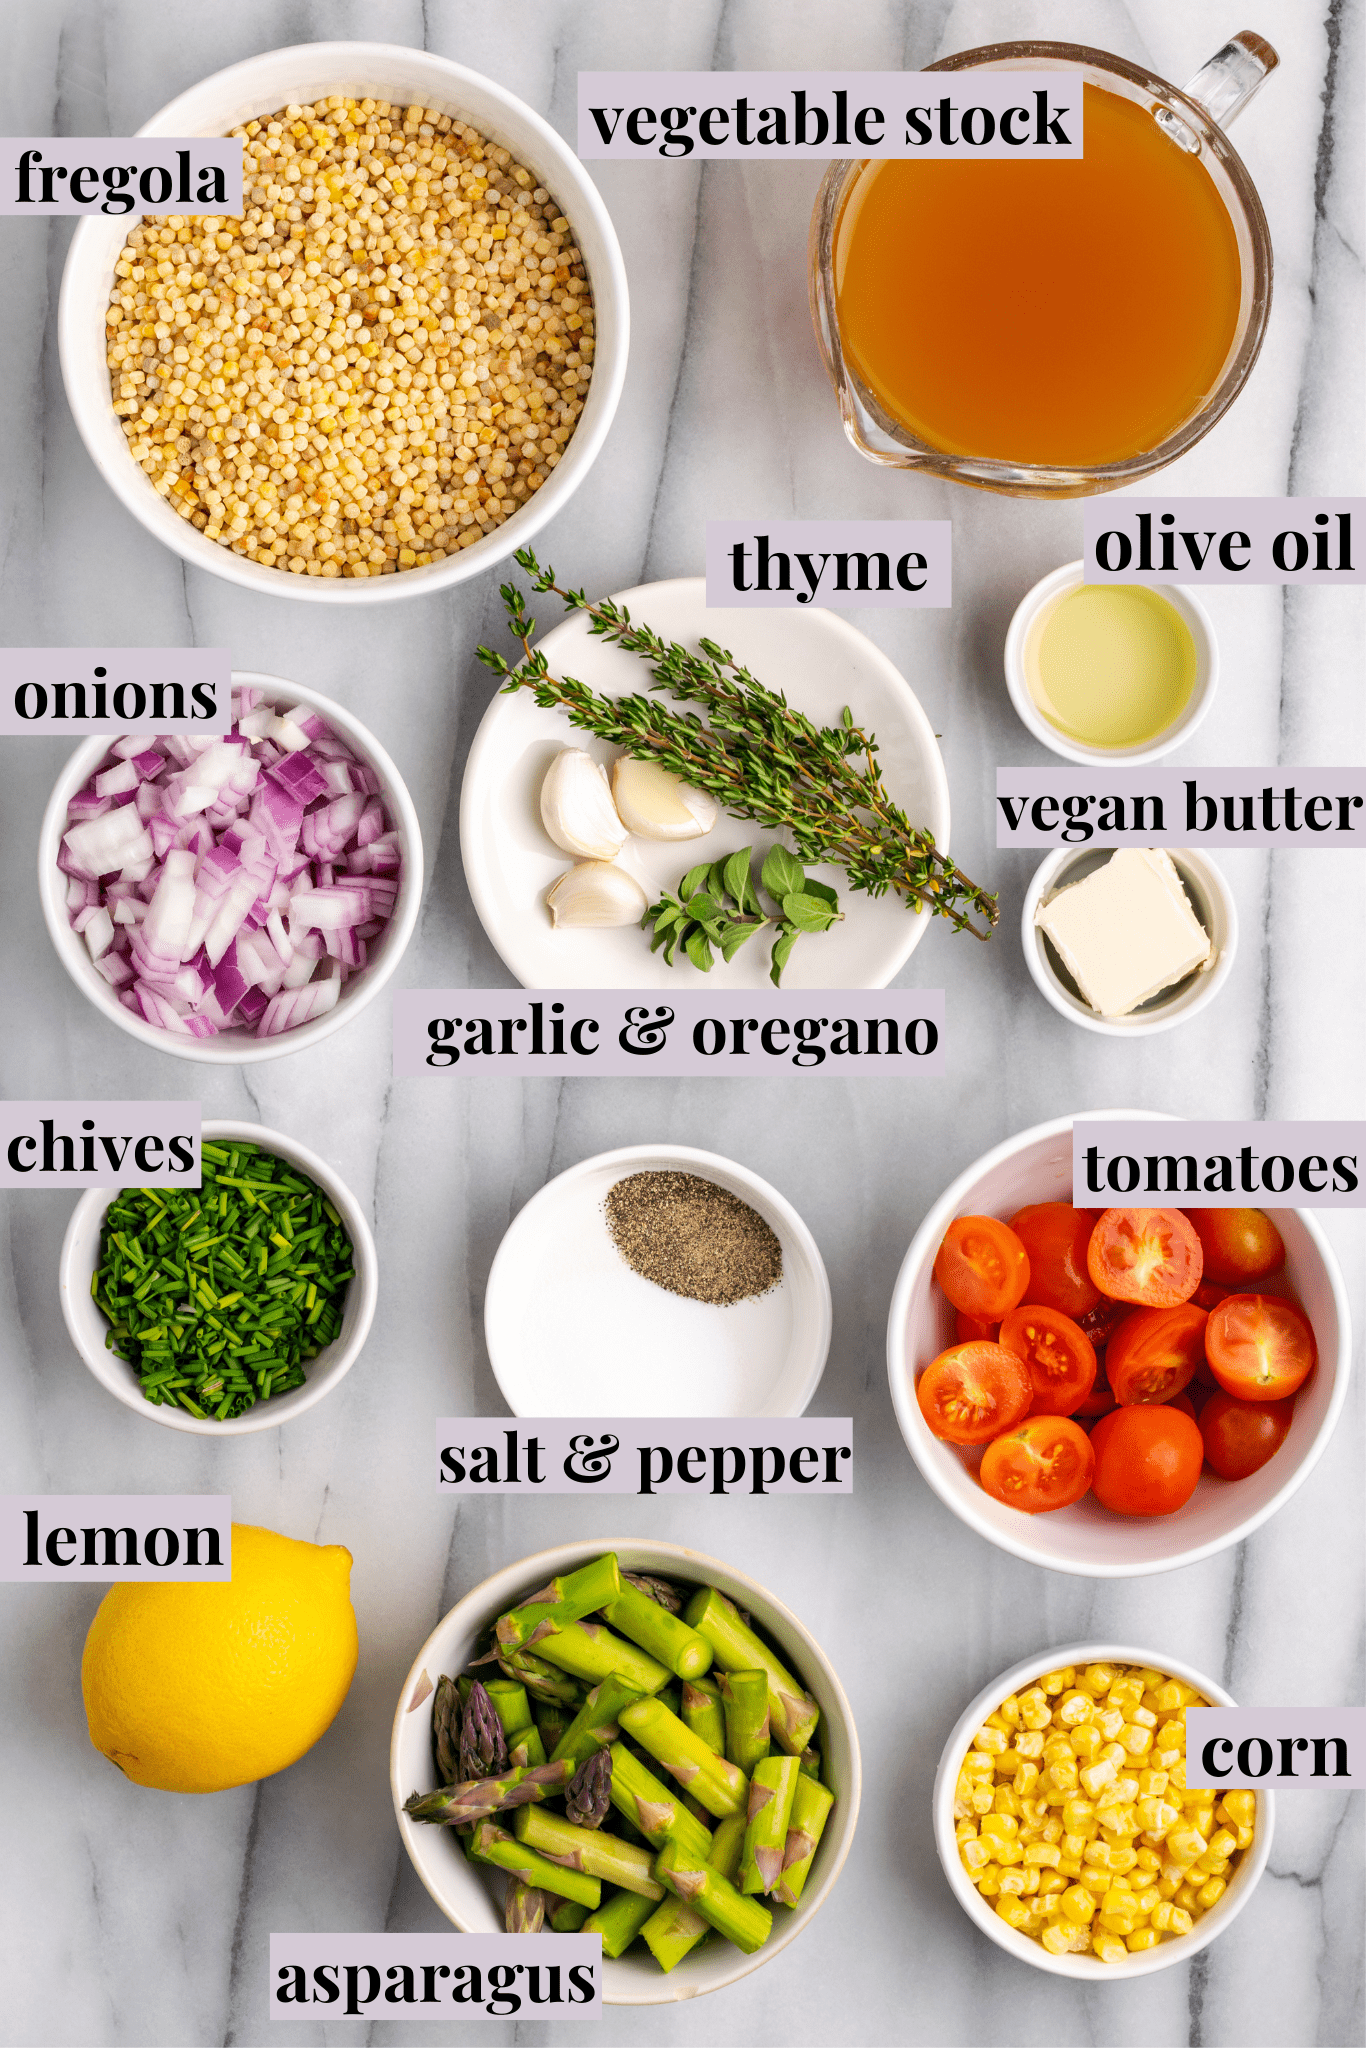 Overhead view of ingredients for herb and veggie fregola